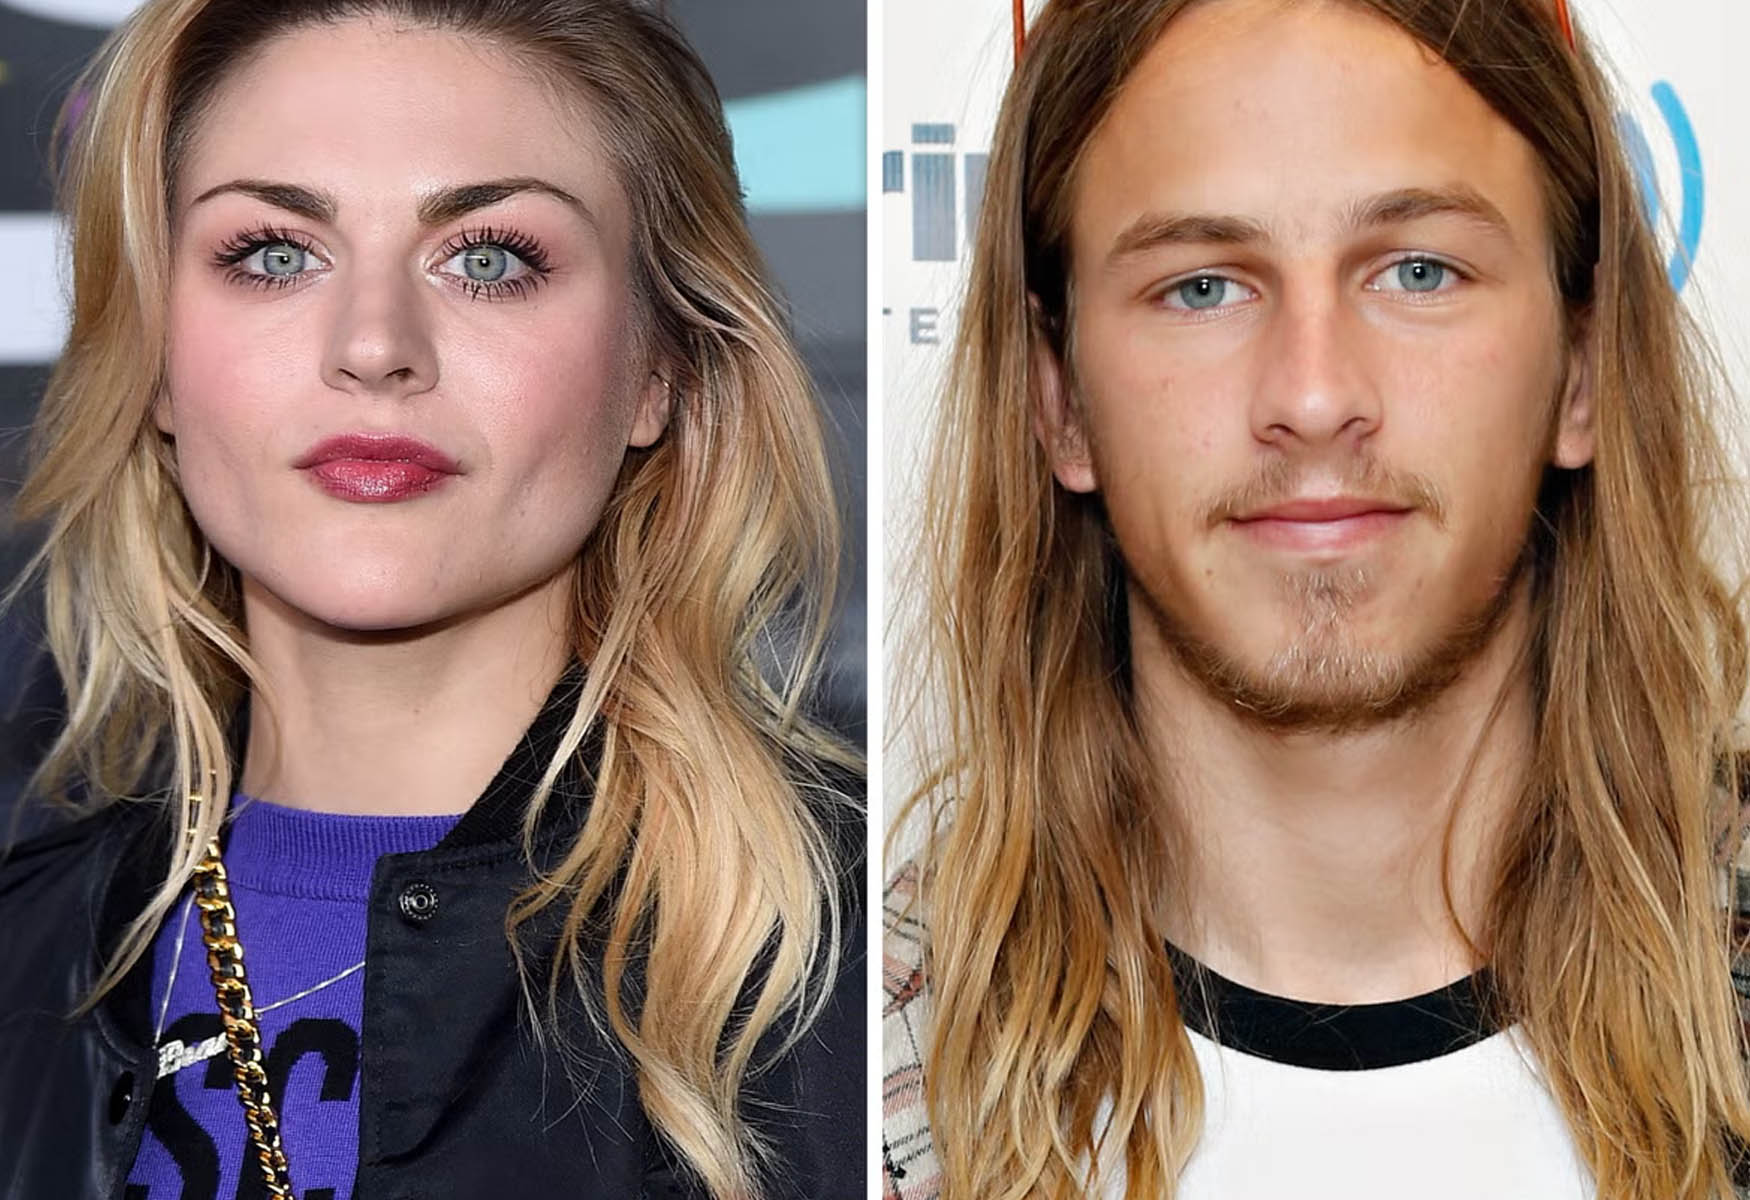 Newlyweds Frances Bean Cobain And Riley Hawk Tie The Knot In Celebrity-Studded Ceremony